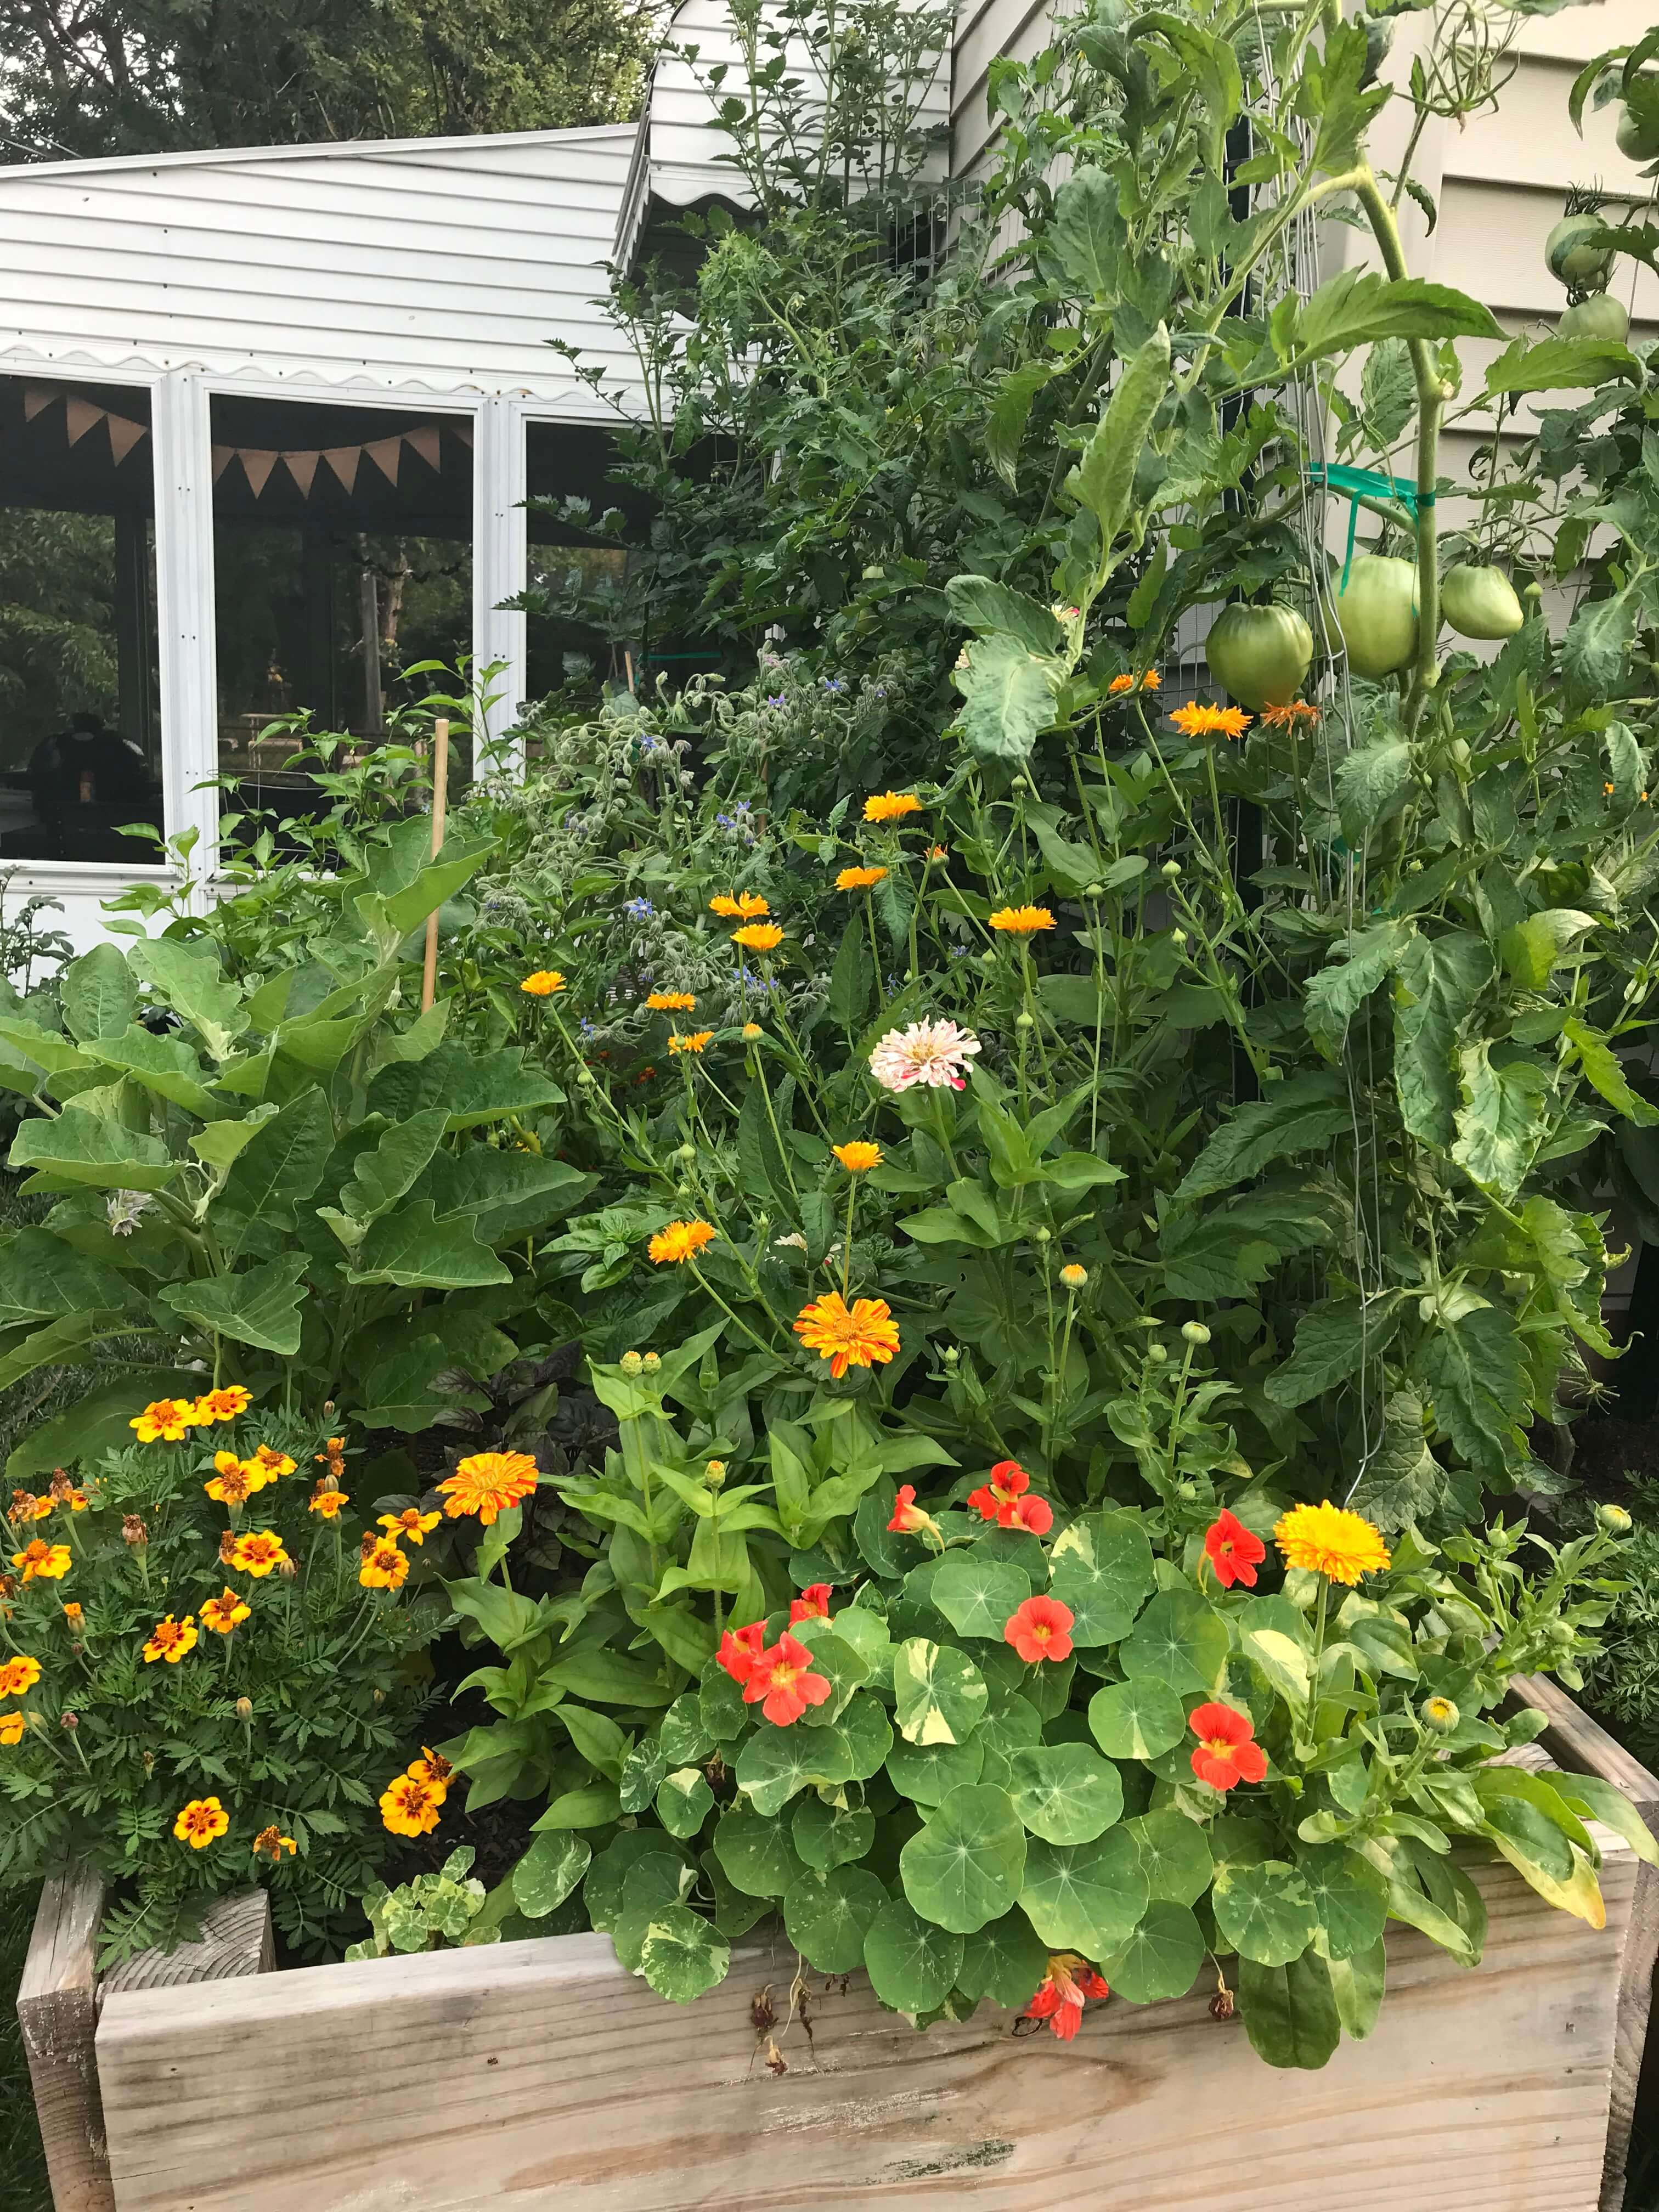 A raised wooden garden bed in full summer bloom. Zinnias, nasturtiums, and marigolds spill over the side, and you can see green tomatoes hanging above as well as an eggplant plant. In the background, bunting hangs inside a screened in porch.